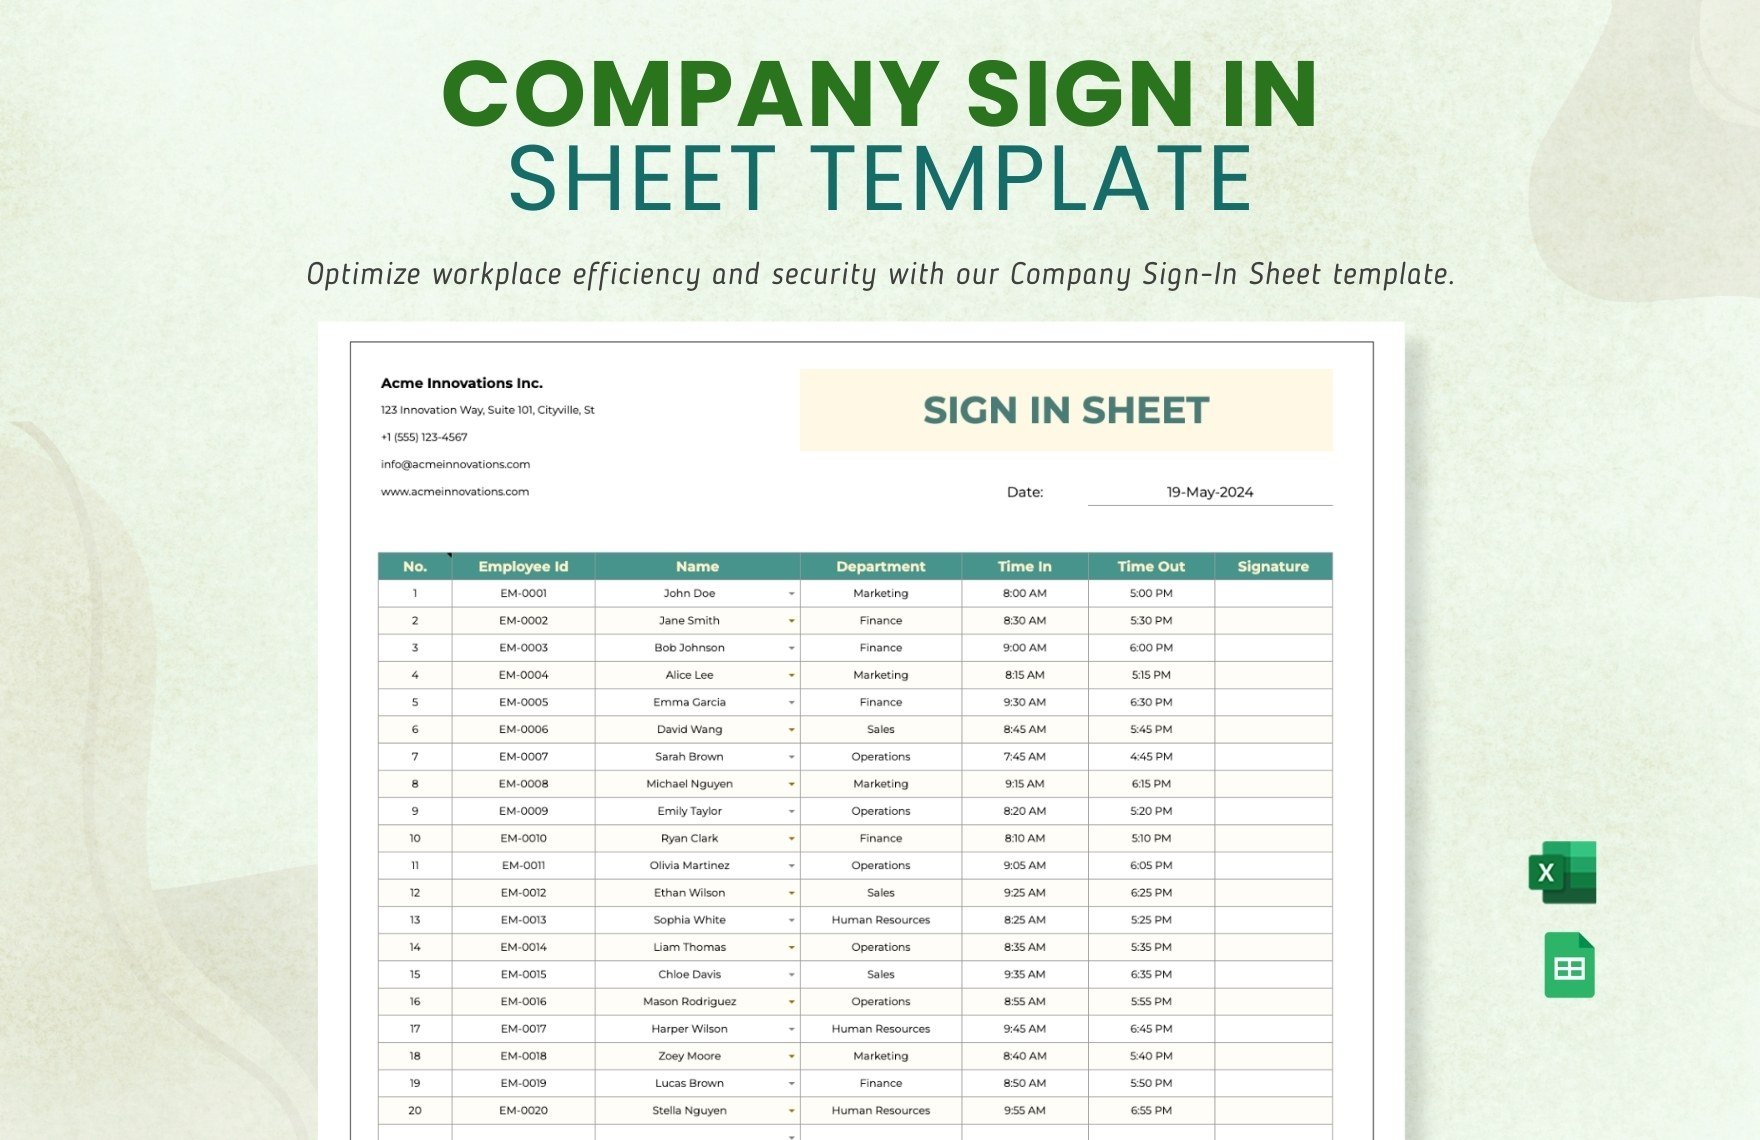 Company Sign in Sheet Template in Excel, Google Sheets